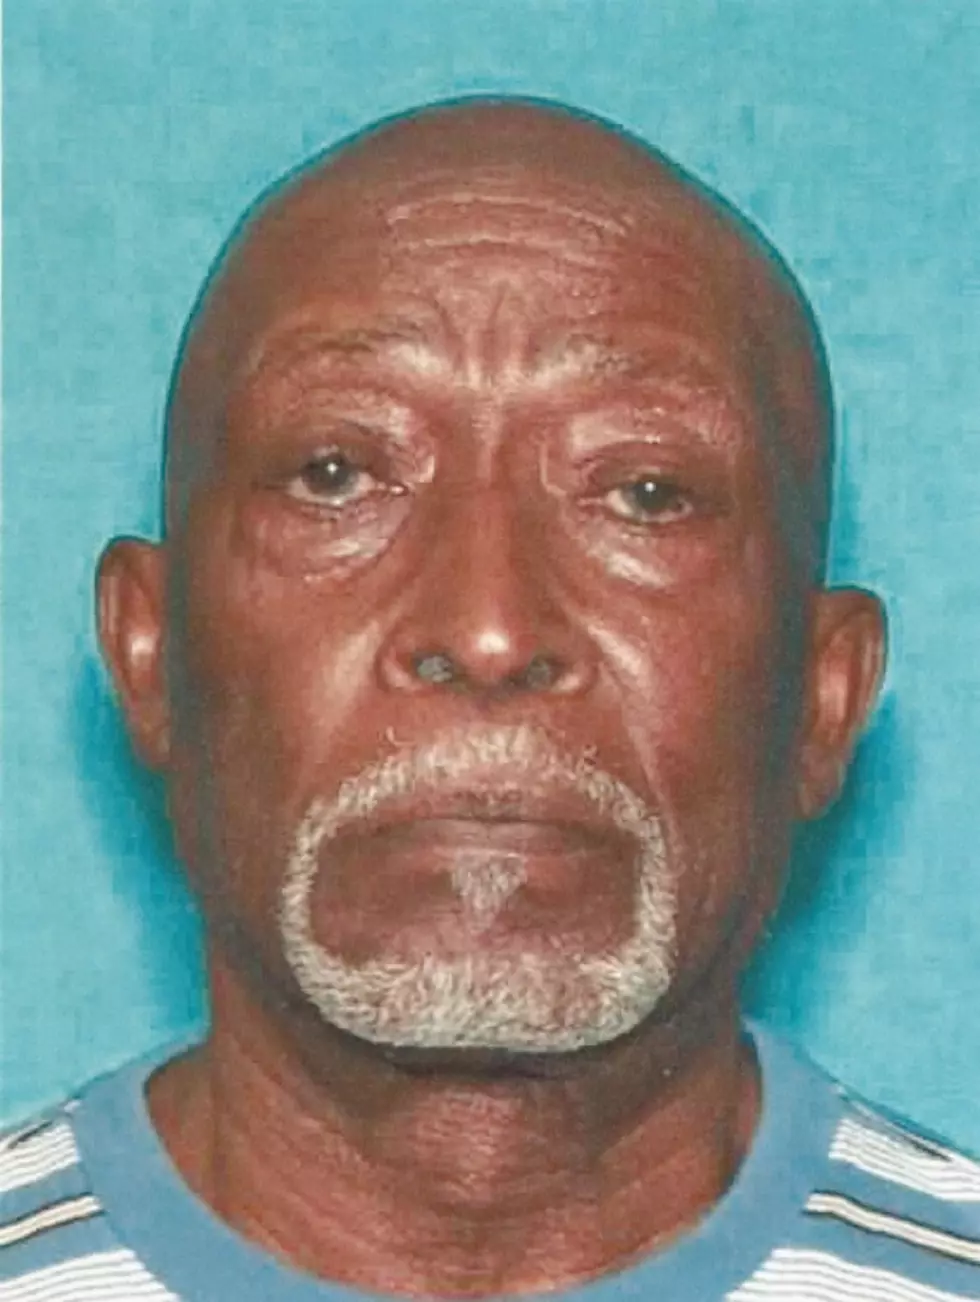 Silver Alert Issued for Missing Killeen Man